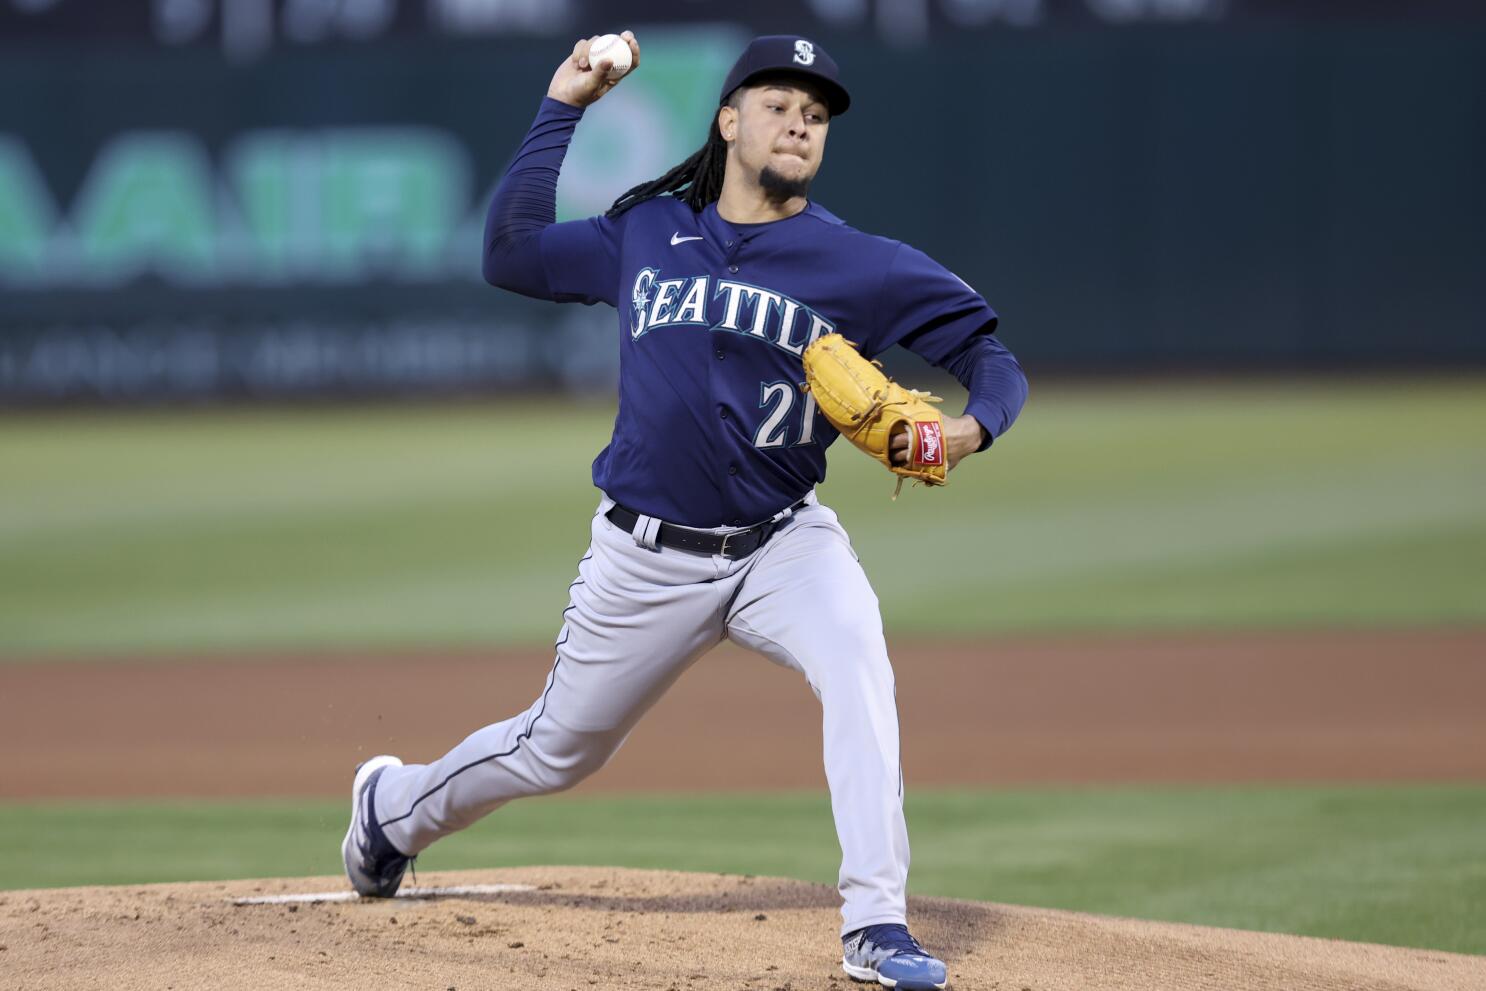 Mariners sign three young Venezuelan pitchers, Seattle Mariners